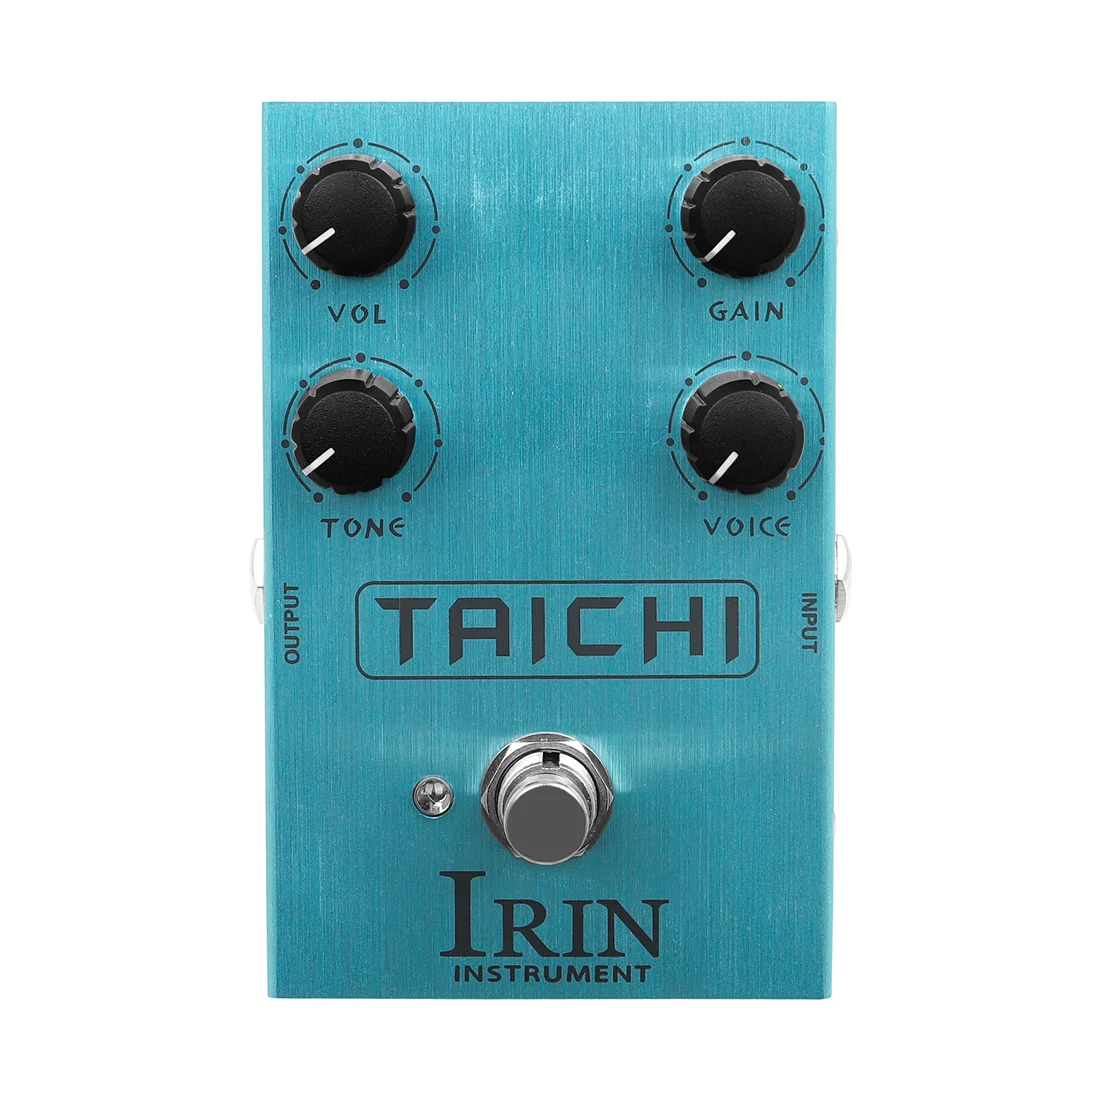 

IRIN AN-38 OD Classic Amp Sound VOICE Knob Controls Different EQ Frequency Bands Guitar Effects TAICHI Low Gain Overdrive Pedal